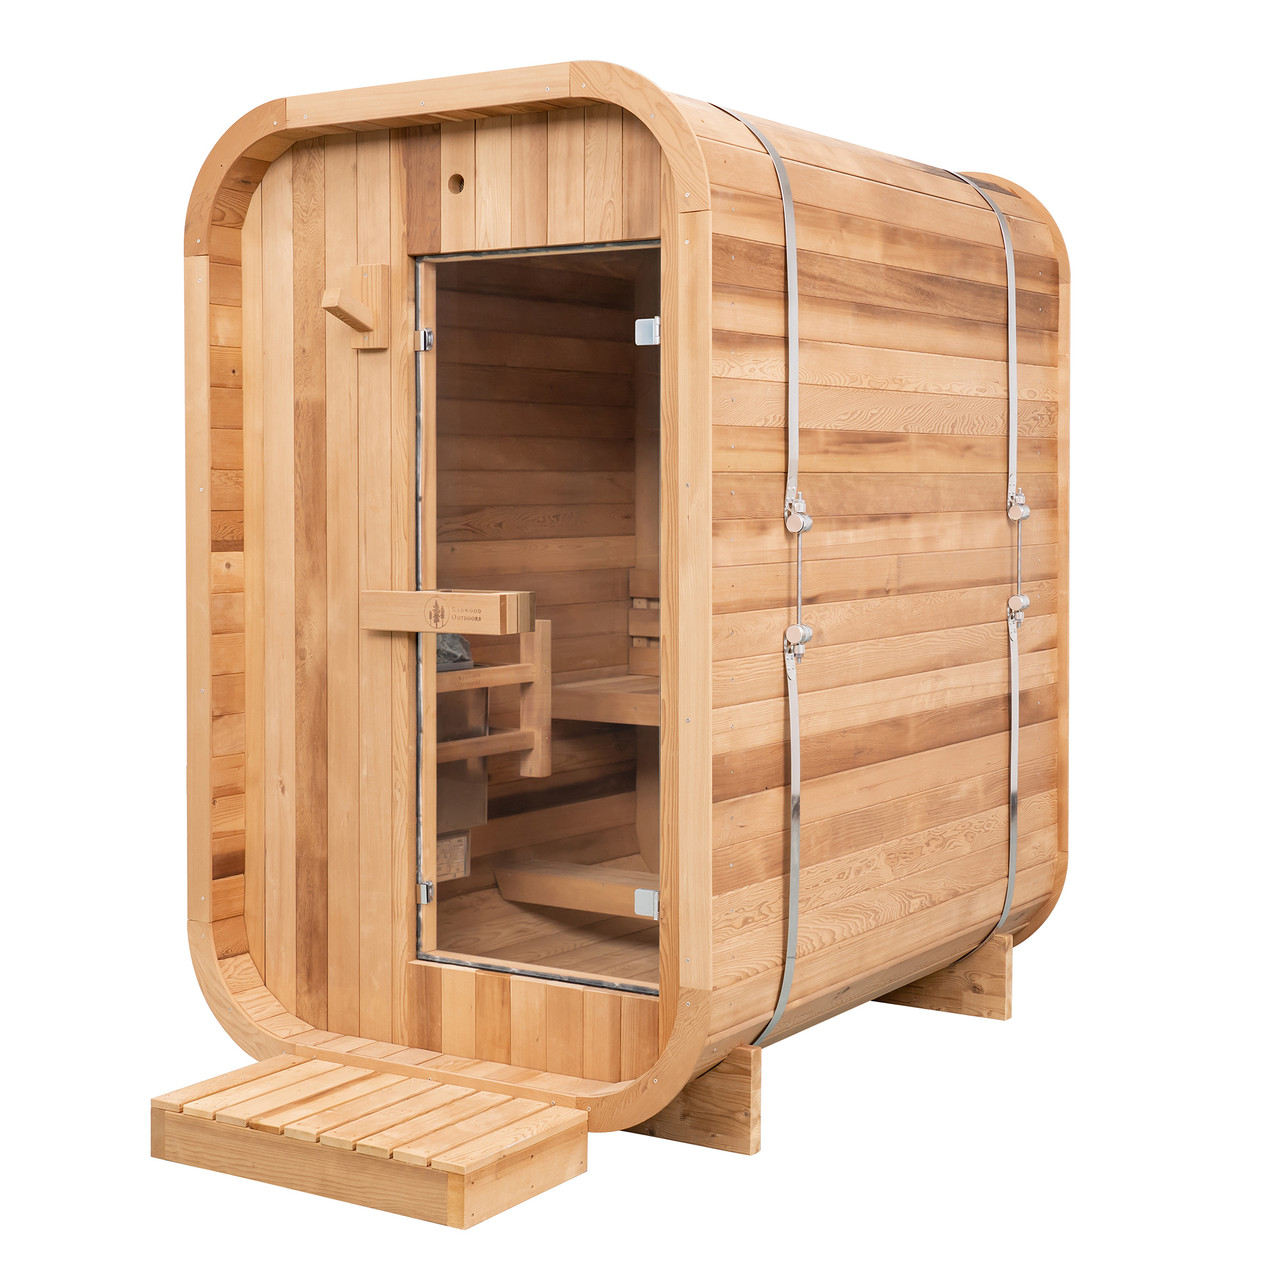 redwood thermowood mini cube outdoor sauna redwood thermowood mini cube outdoor sauna - front view- front view